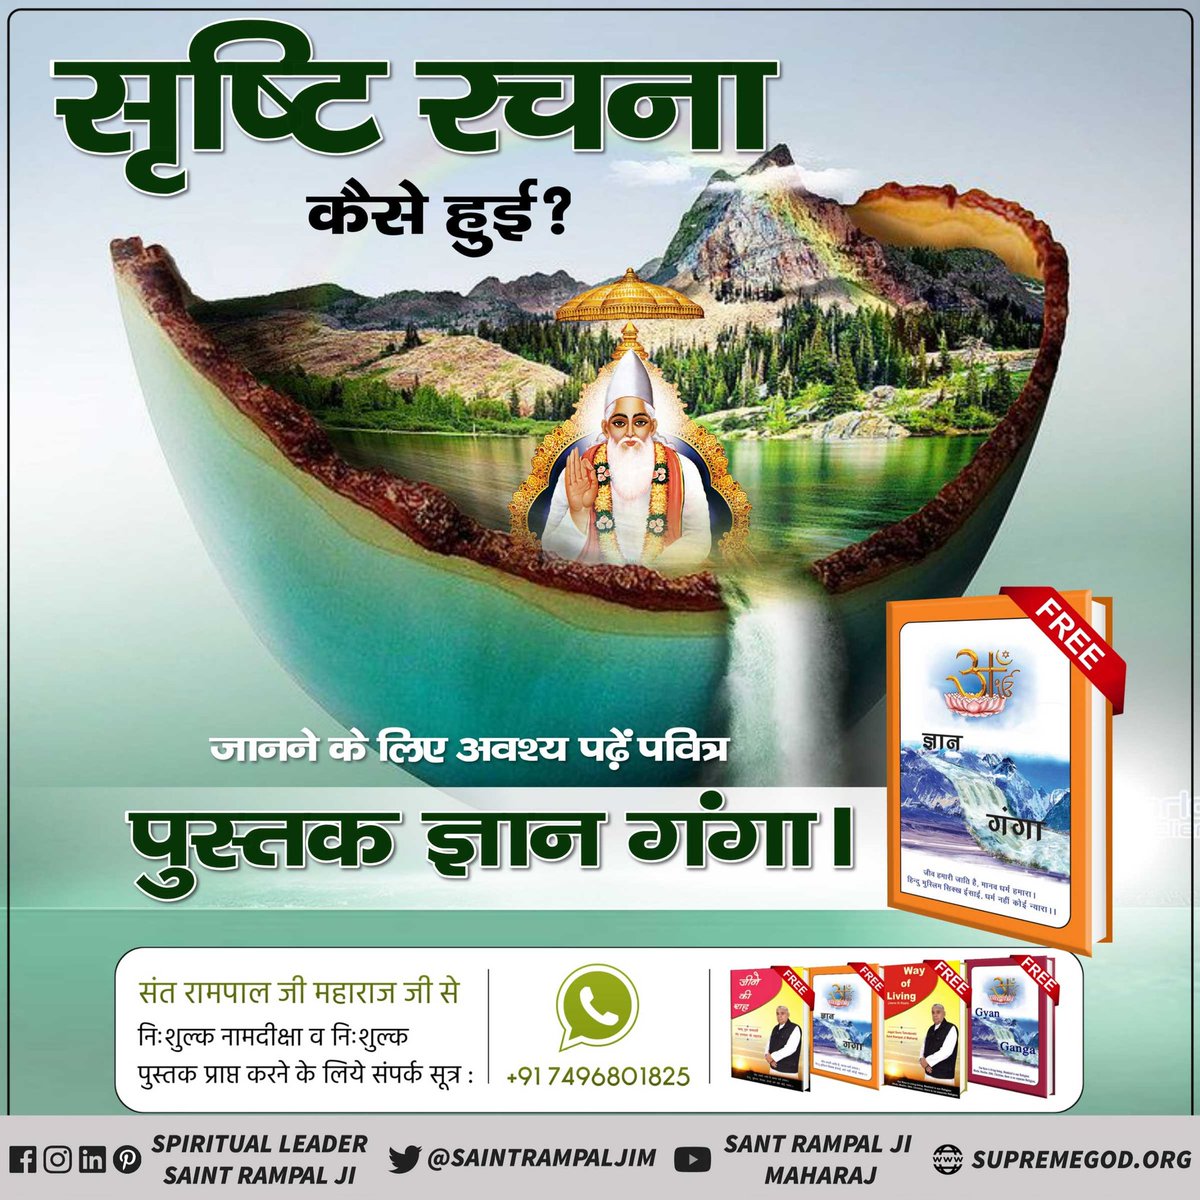 #GodMorningFriday
How was the universe 
created?
For More Information must read the previous book 'Gyan Ganga''
#fridaymorning